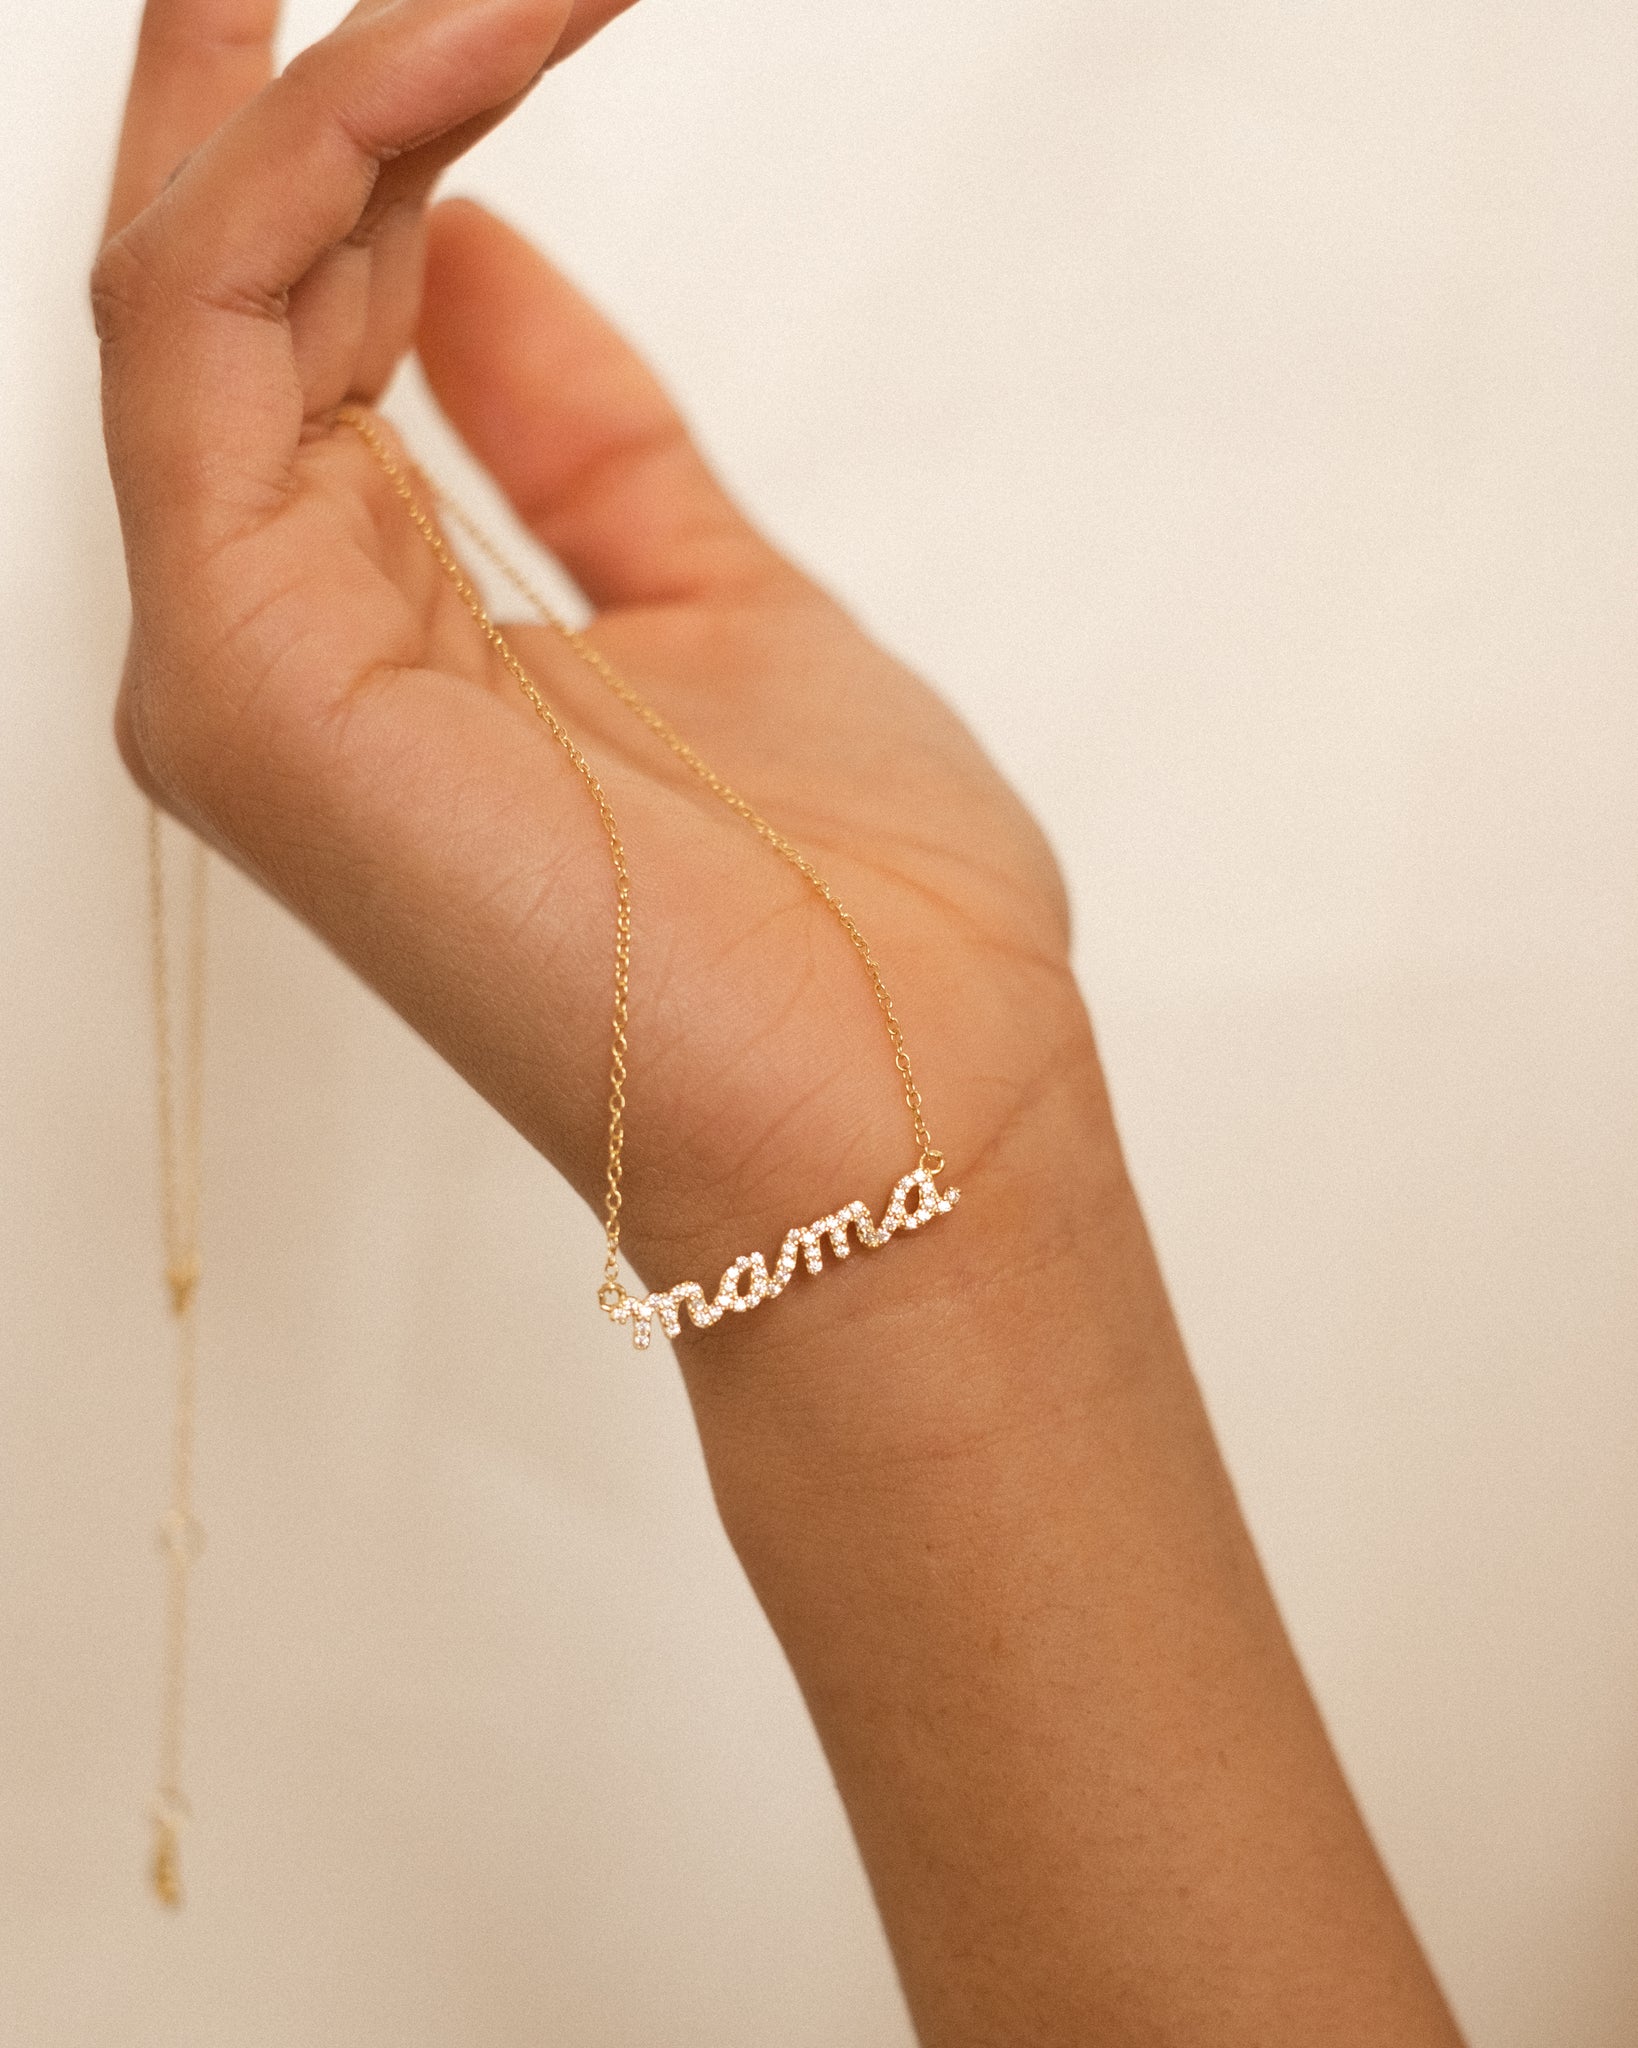 pave mama necklace, pave script necklace, mama script necklace, pave script mama necklace, mother script necklace, mother’s day jewelry, mother’s day necklace, mama necklace, mother necklace, mother’s day gift, sterling silver jewelry, 18k gold, dainty jewelry, dainty necklaces, mother necklace, necklace for mother, birthday gift, mama letter necklace